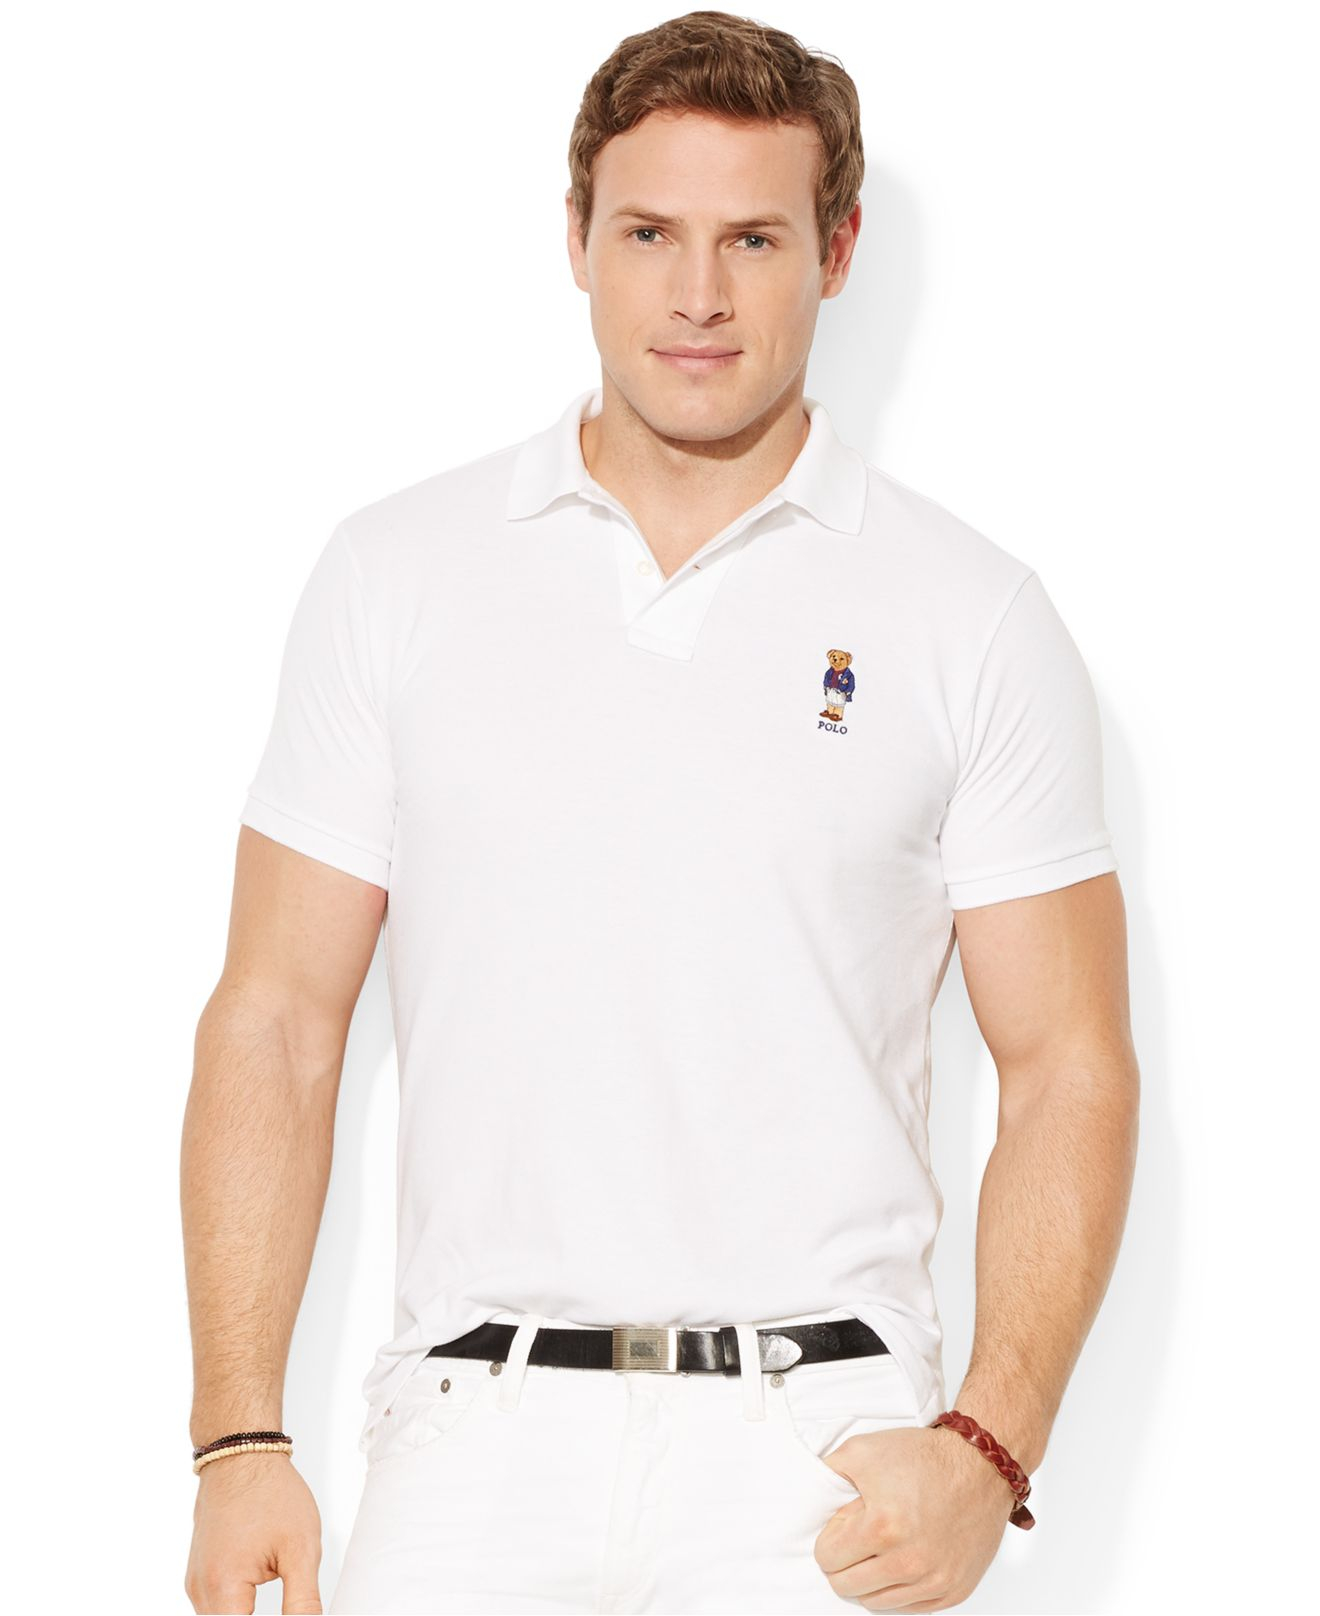 Lyst - Polo Ralph Lauren Big And Tall Classic-Fit Polo Bear Mesh Shirt